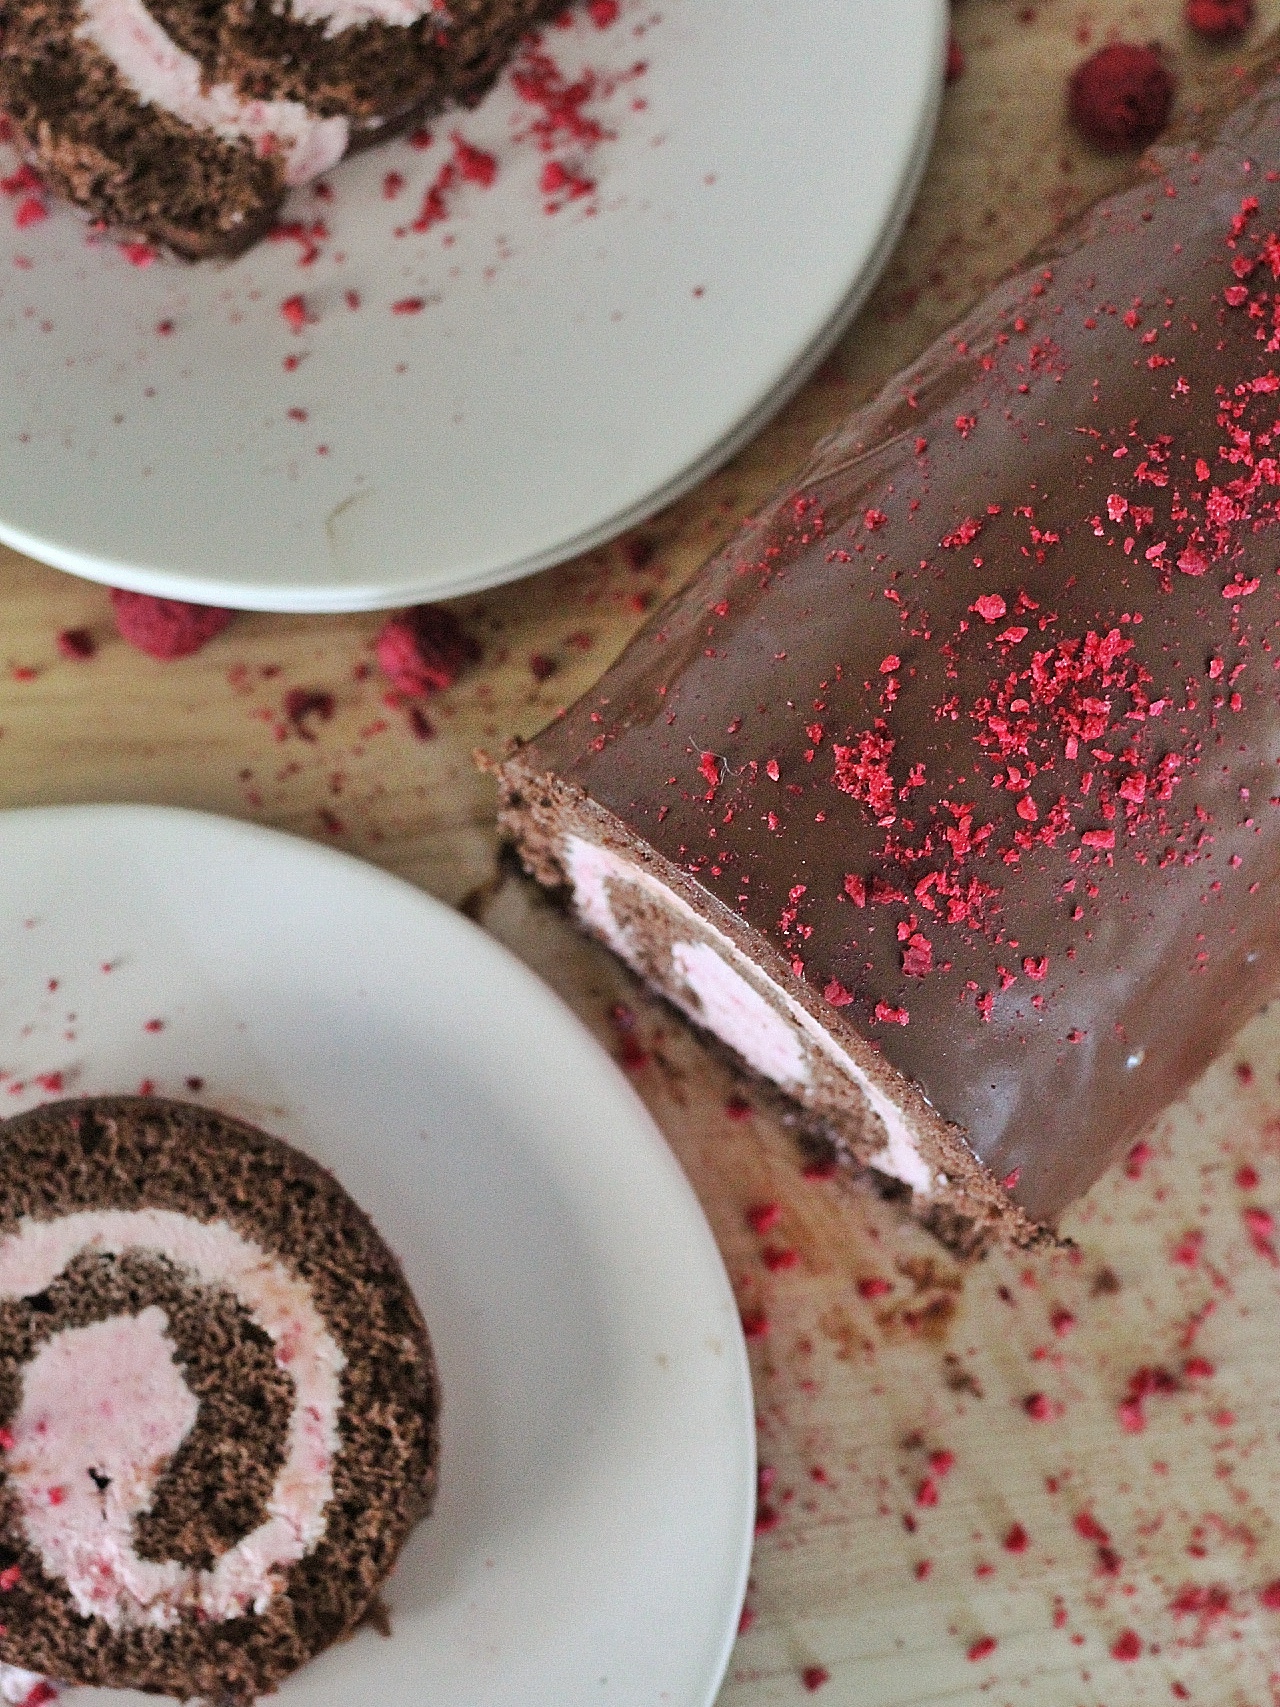 tips and tricks to making a homemade chocolate swiss roll. www.cakebycourtney.com